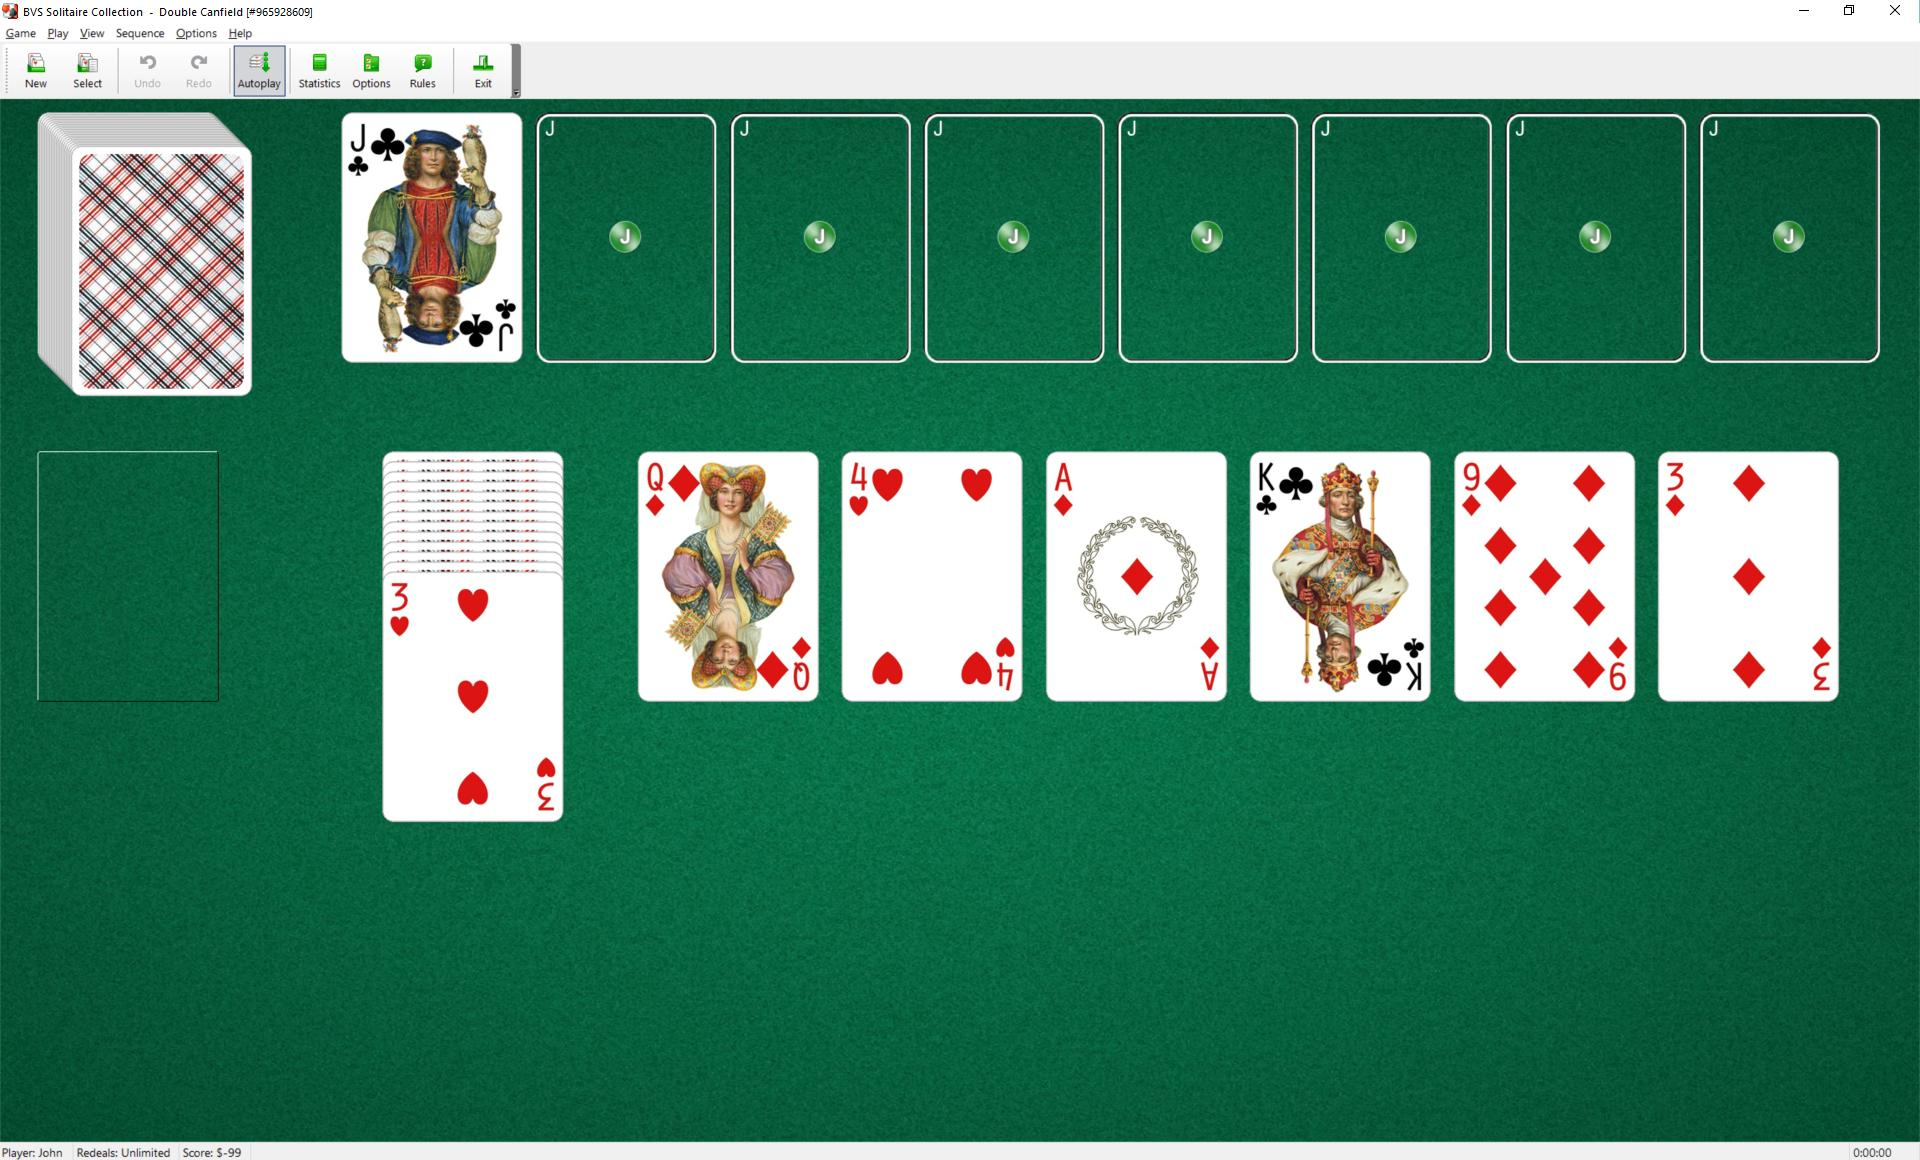 solitaire rules one deck